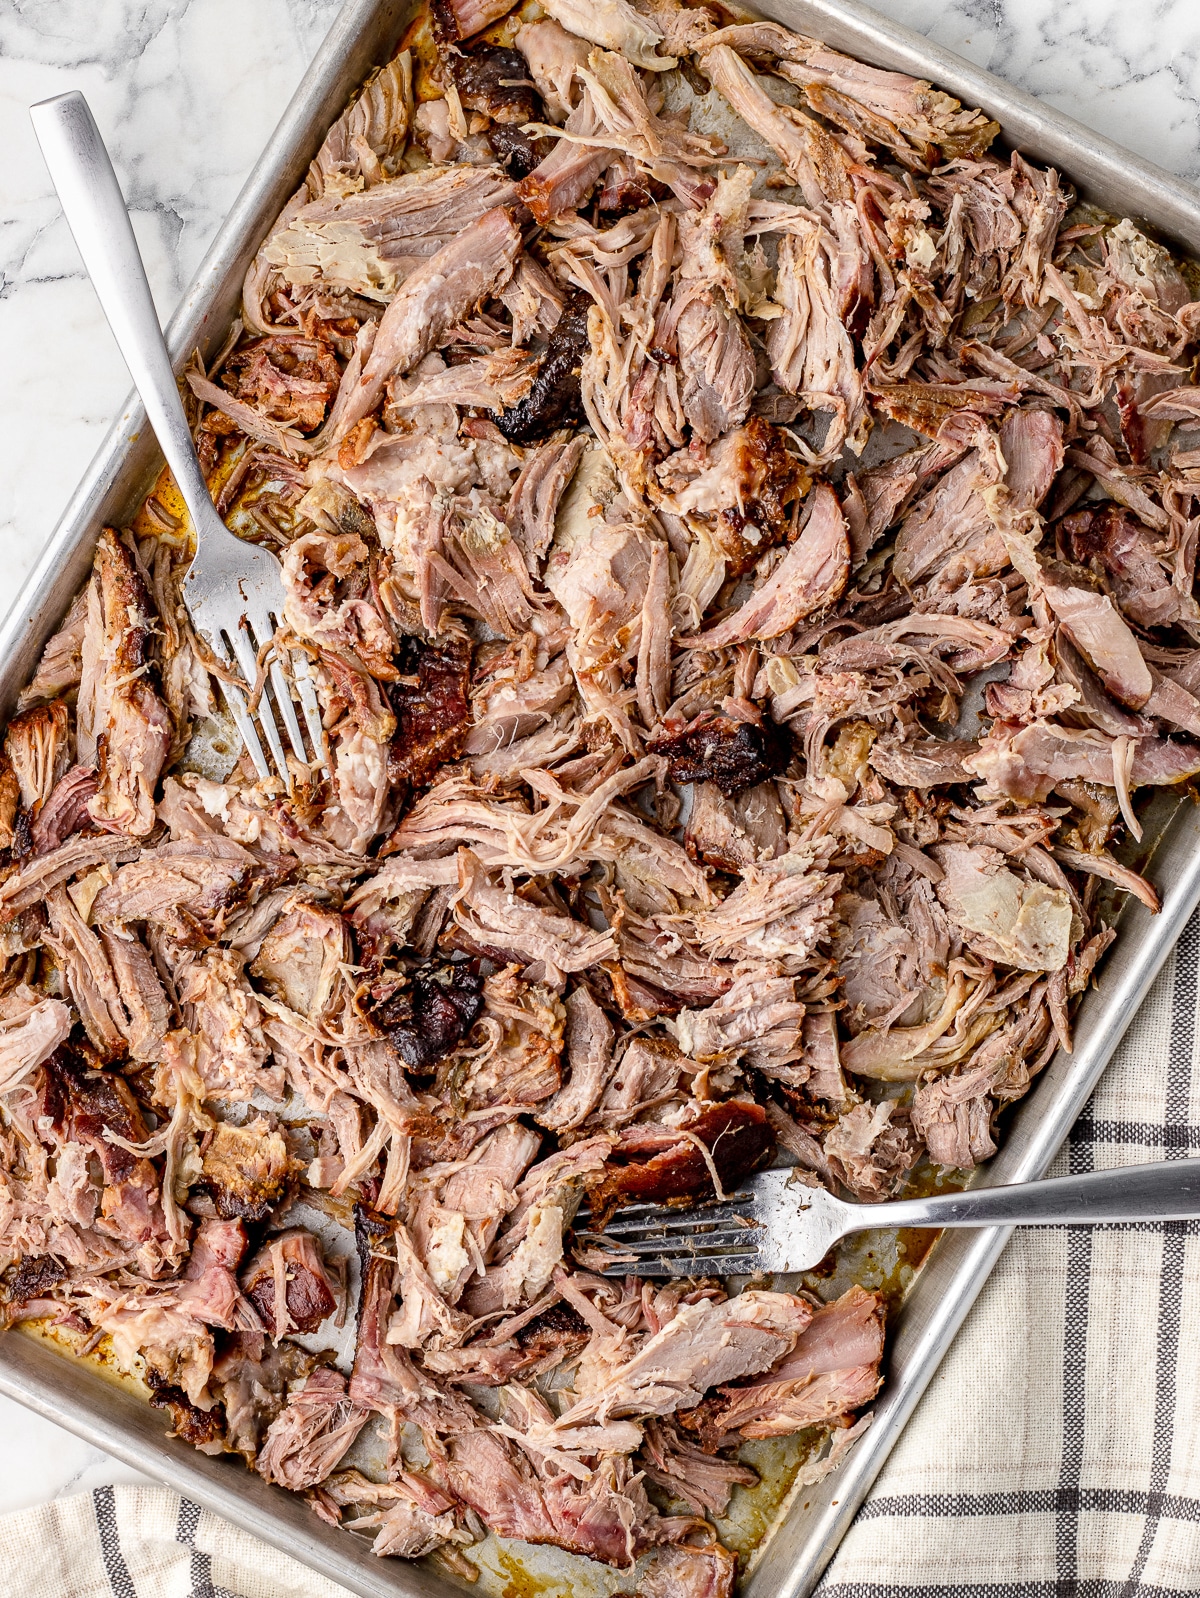 Shredded smoked pulled pork on a tray with two forks.